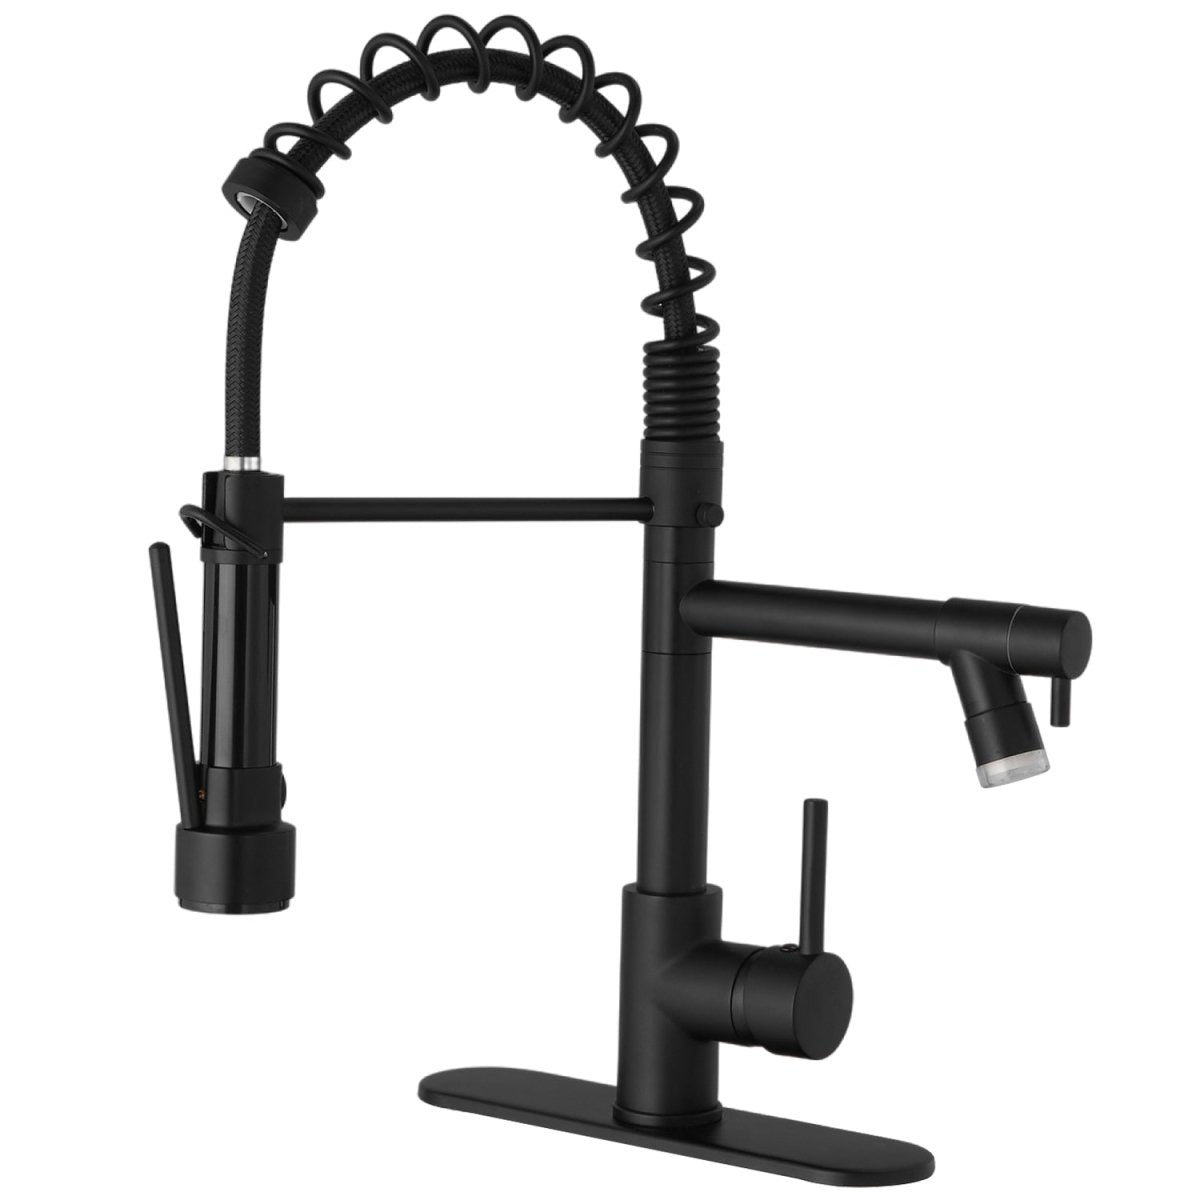 Touch On Deck Mount Pull Down Sprayer Kitchen Faucet Black - buyfaucet.com